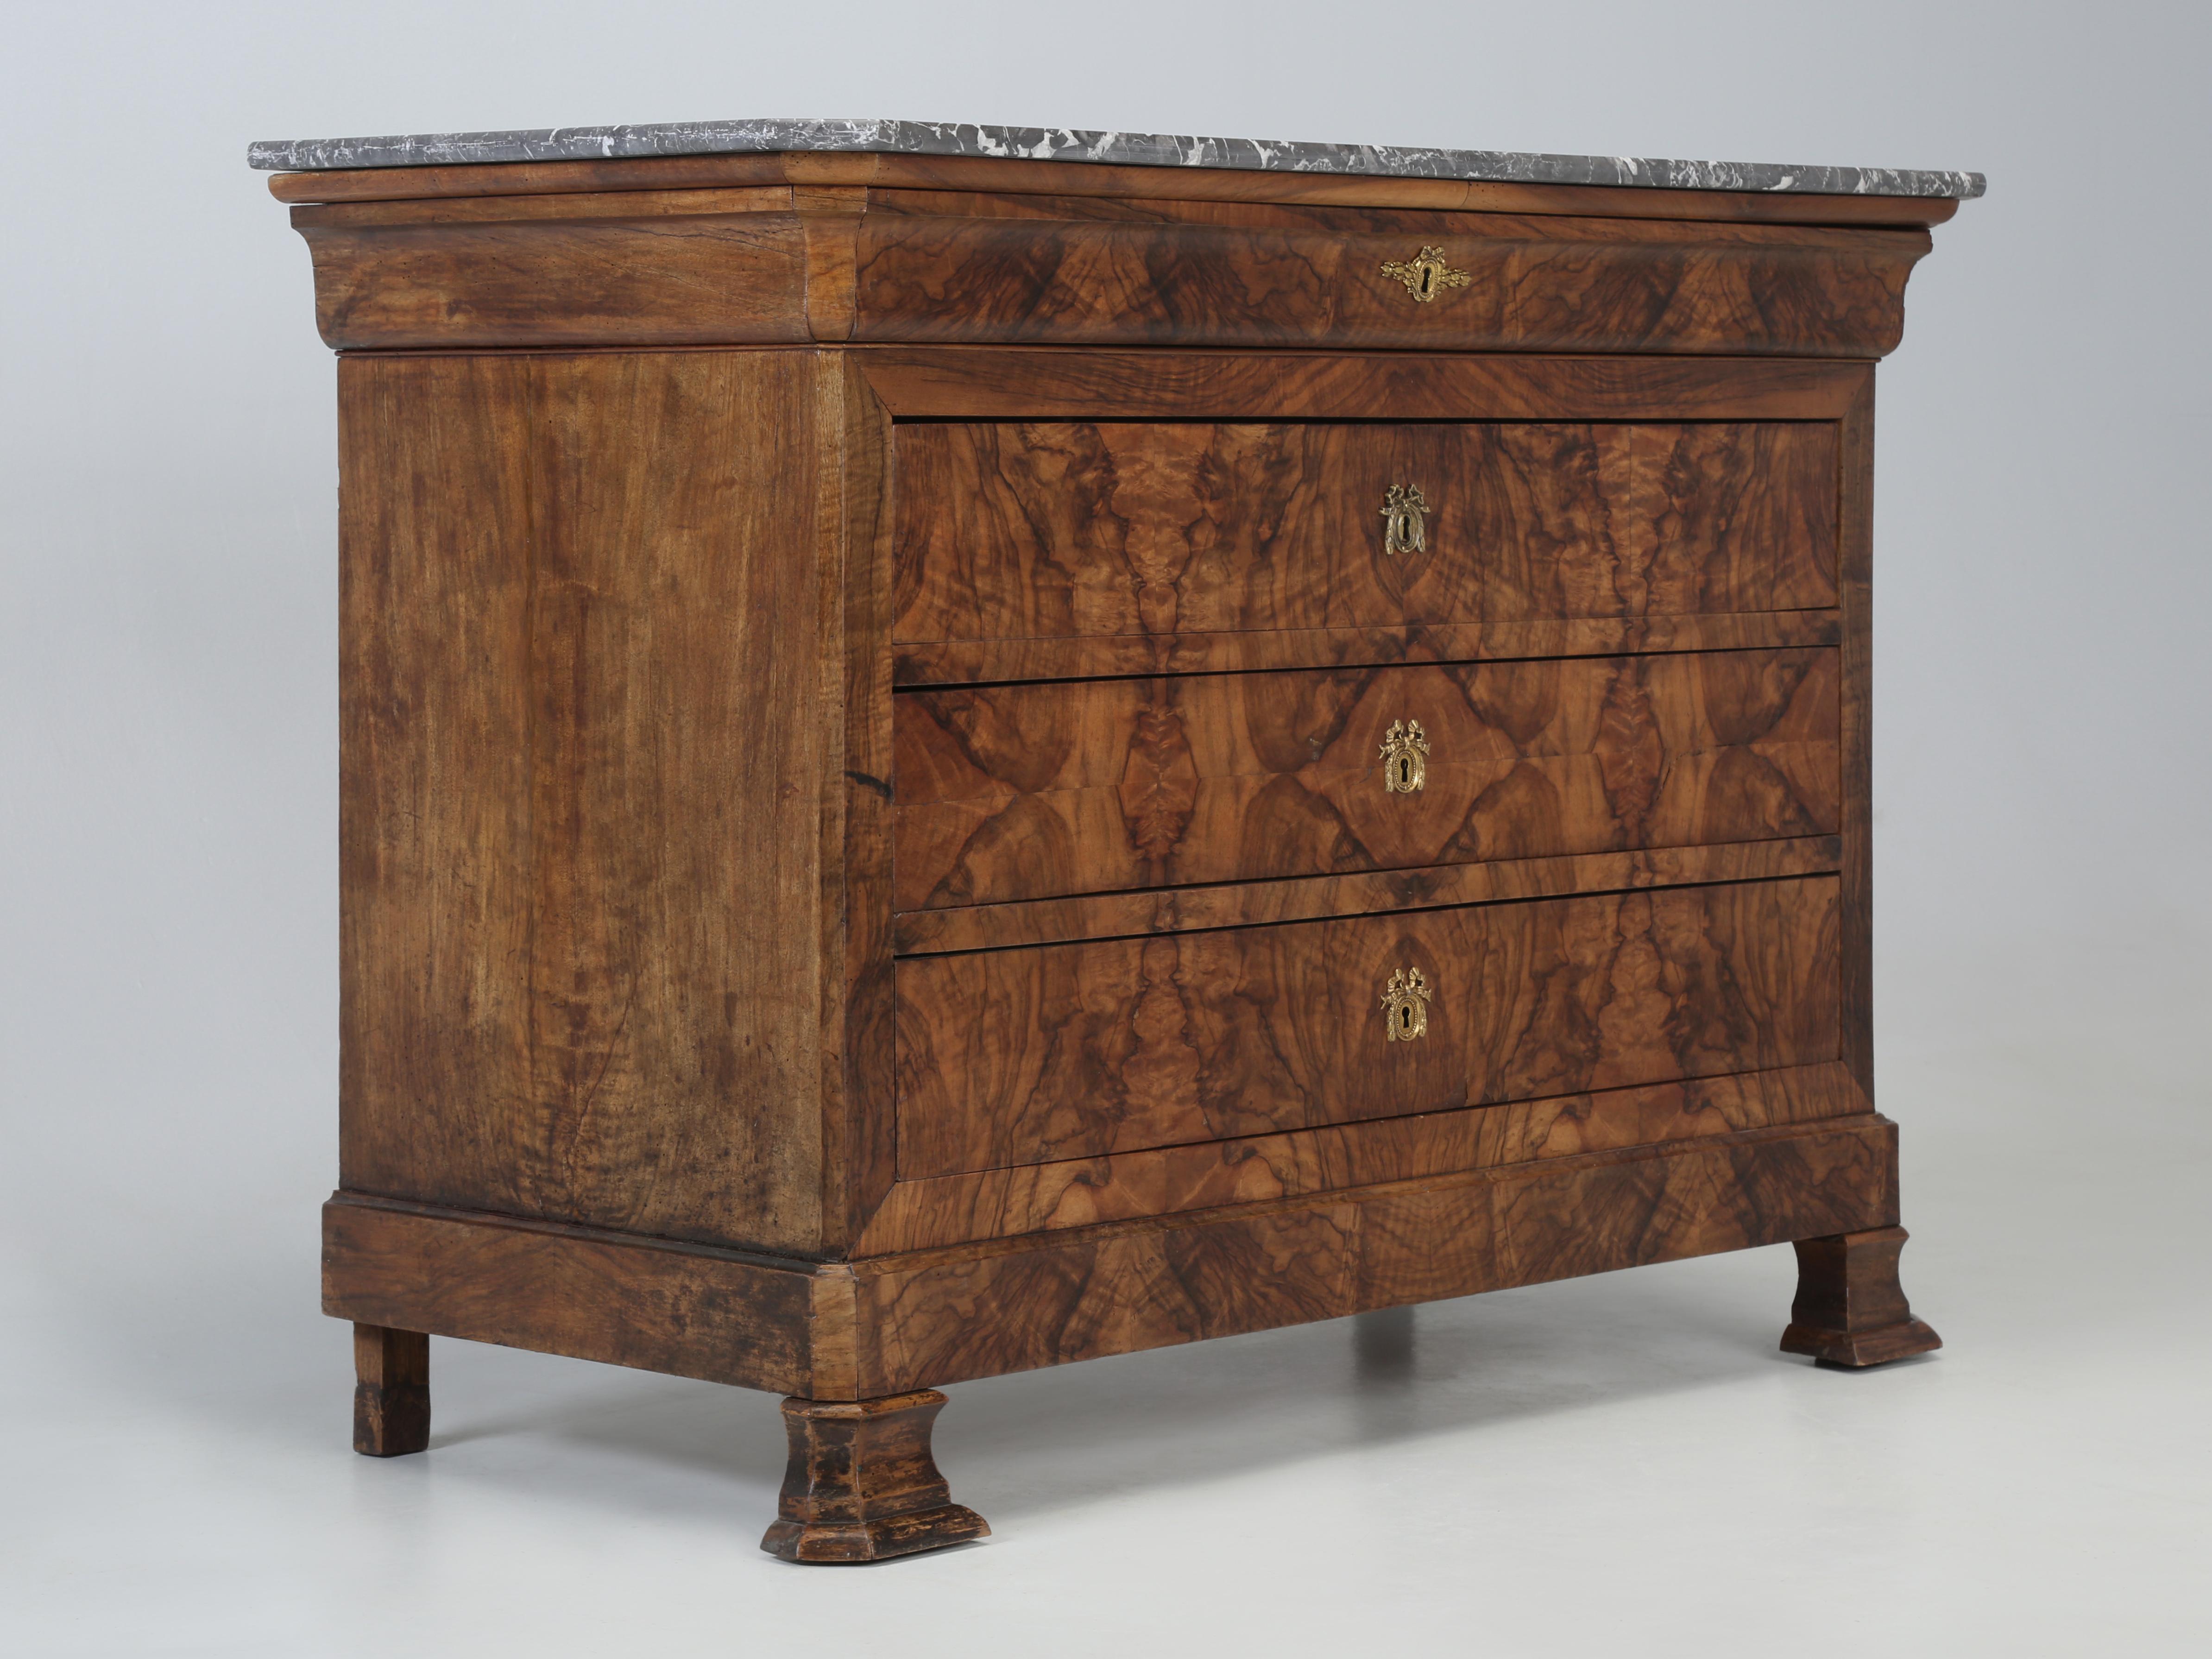 Hand-Crafted Antique French Commode Louis Philippe Style Burl Walnut Book-Matched Marble Top